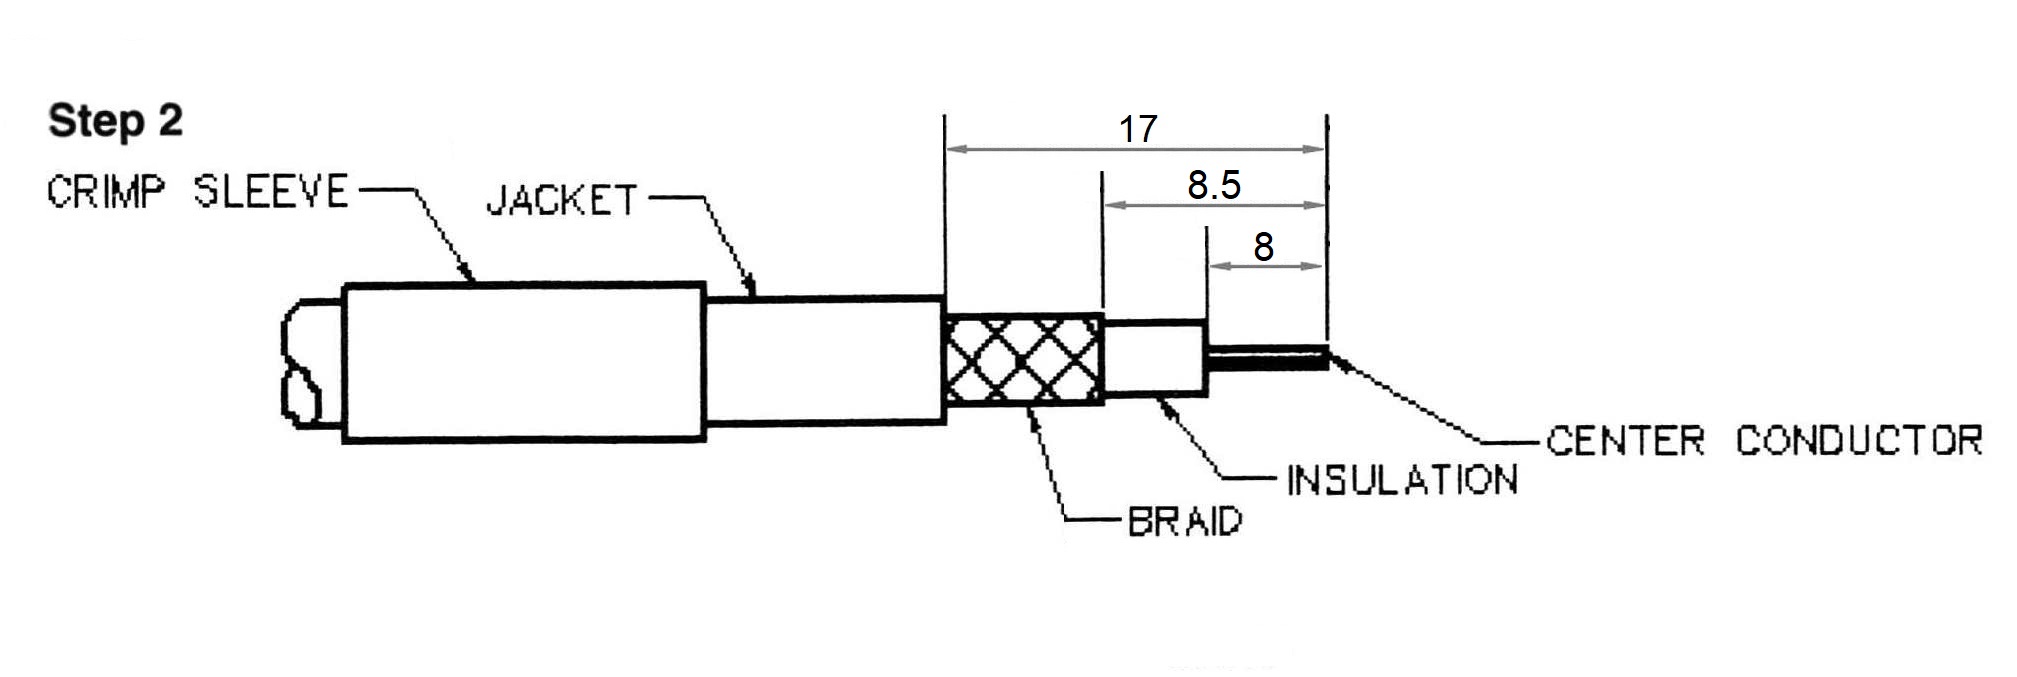 BNC female Crimp On for RG-58, LMR-195 and other 0.195 Inch OD Coax 7006-BNC-58 Installation Guide step 2 - Max-Gain Systems Inc